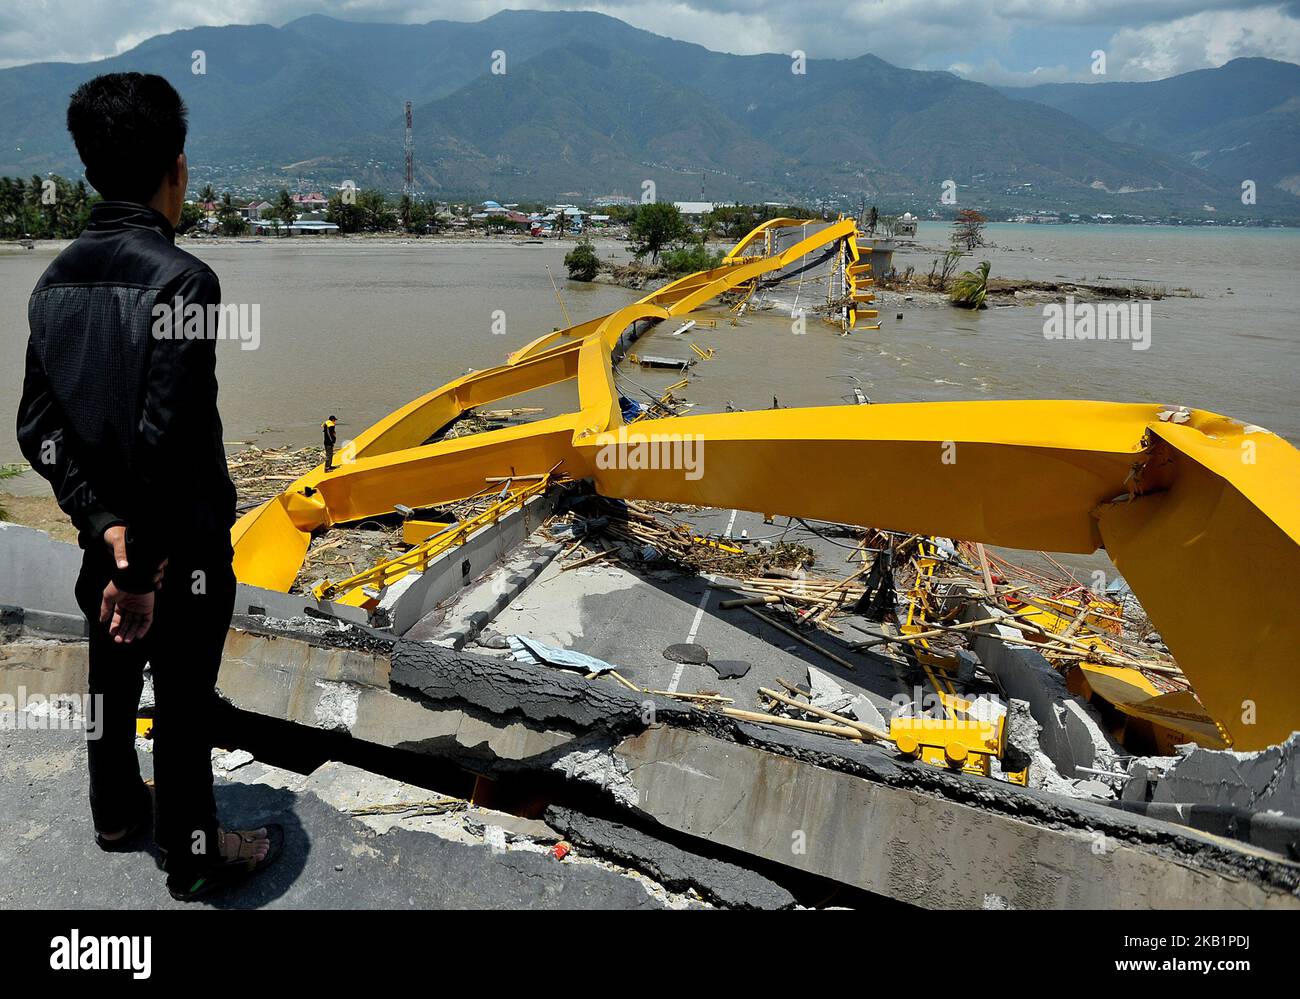 Palu residents stand near on the Palu Bridge, which collapsed in the recent earthquake and tsunami, near Talise Beach in Palu, Central Sulawesi, Indonesia, 02 October 2018. According to reports, at least 844 people have died as a result of a series of powerful earthquakes that hit central Sulawesi on 28 September 2018 that triggered a tsunami. (Photo by Dasril Roszandi/NurPhoto) Stock Photo